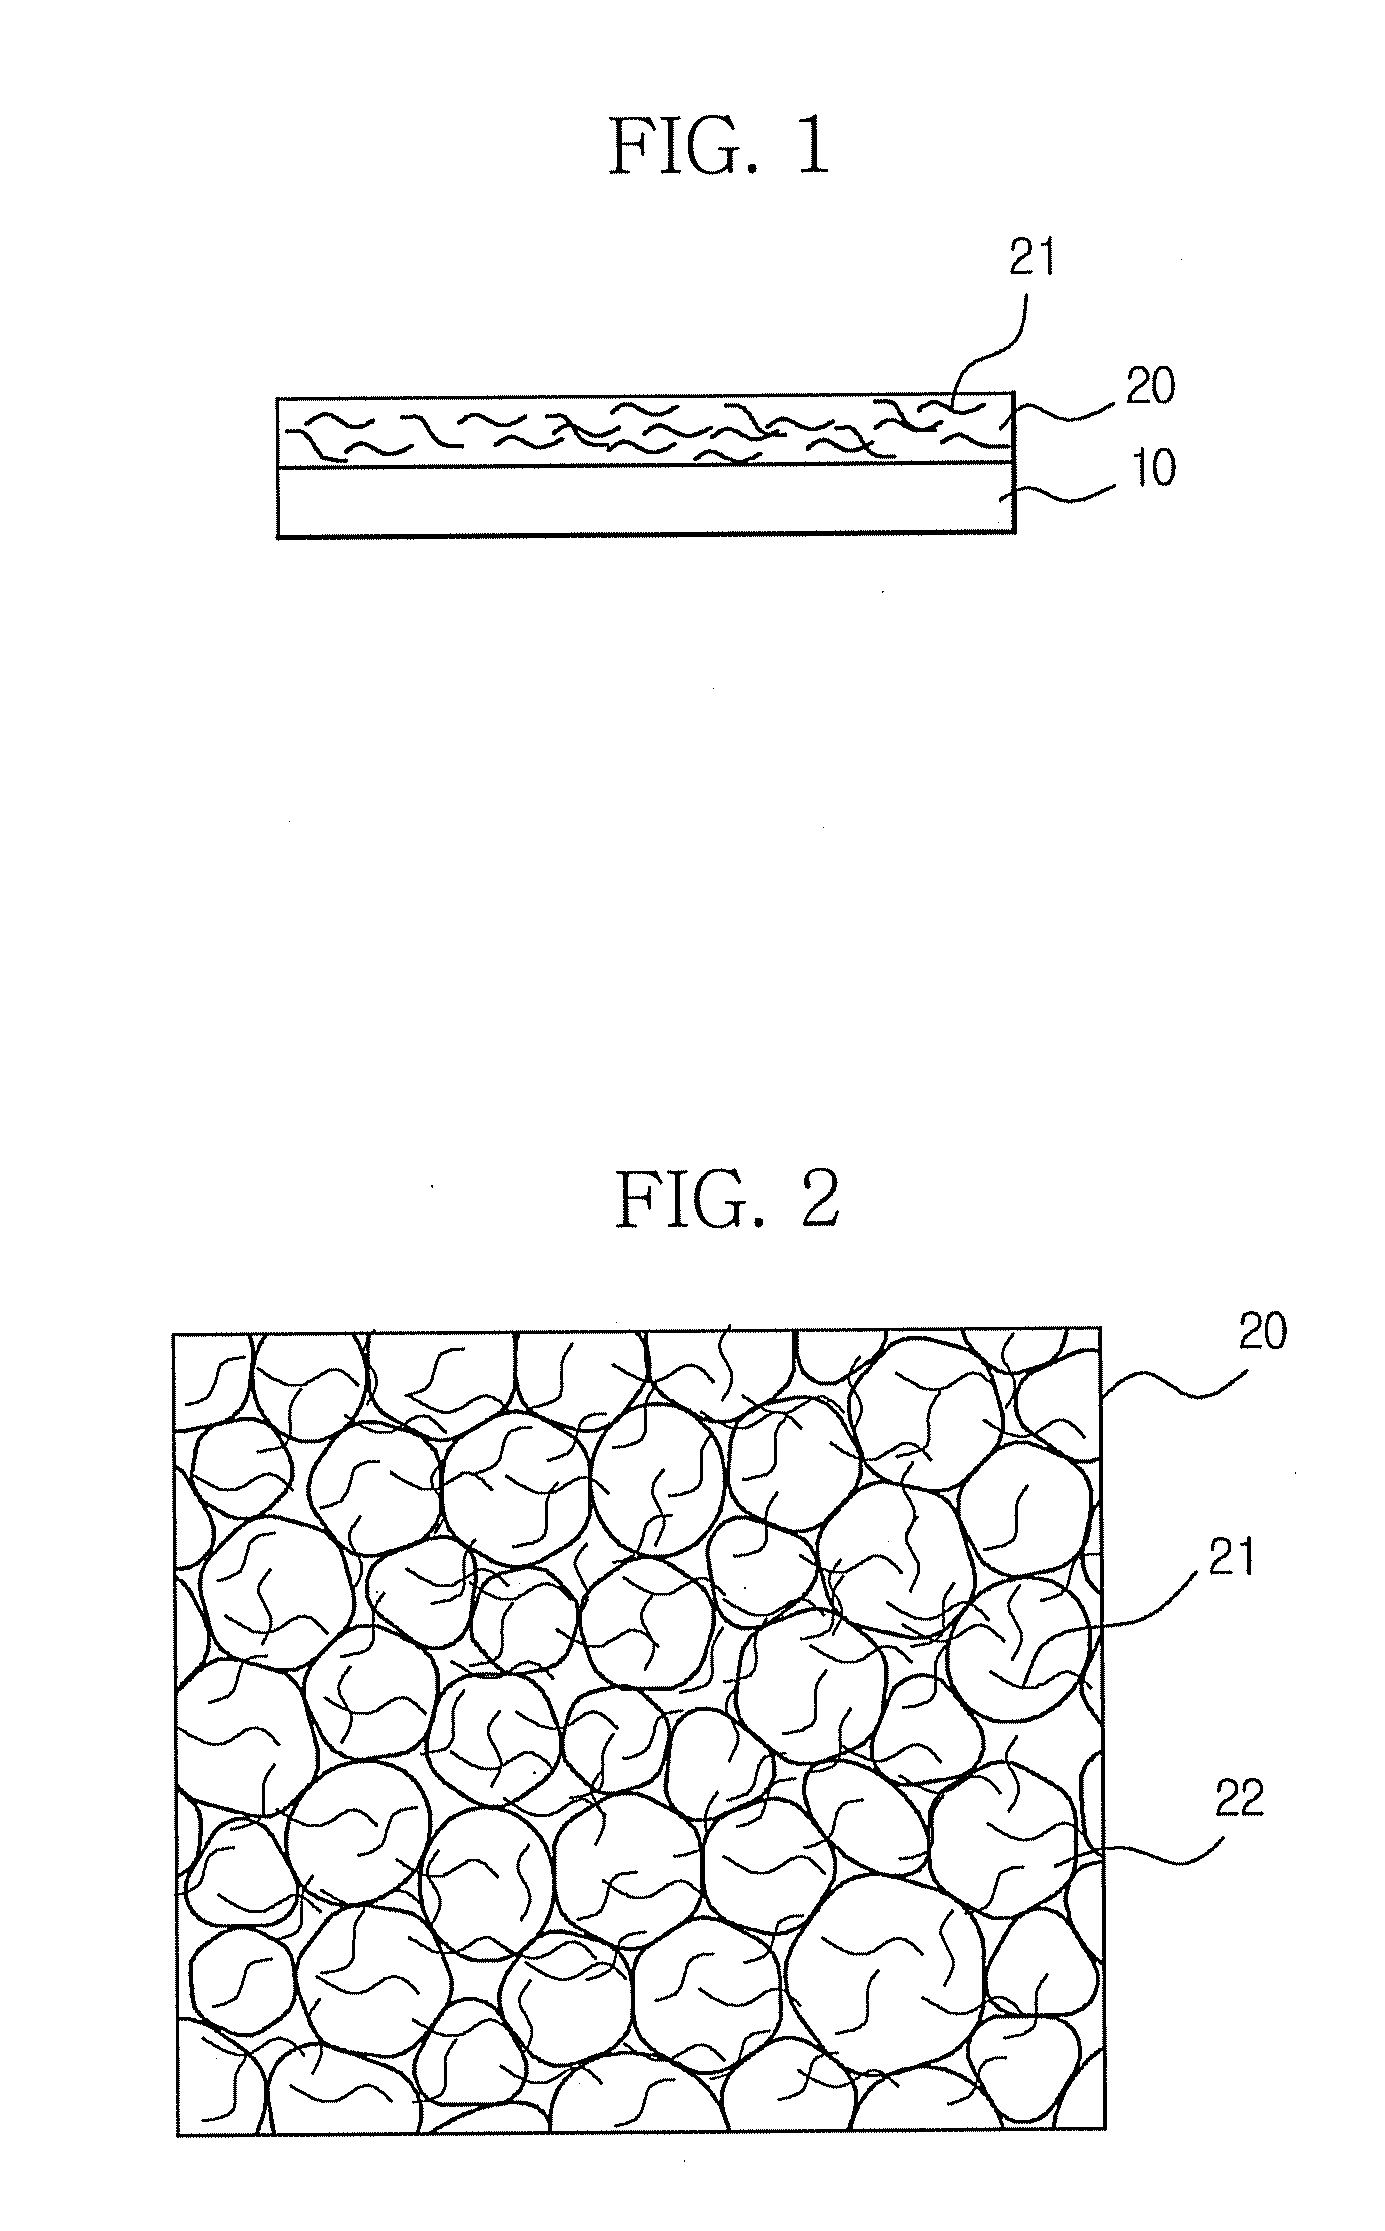 Transparent carbon nanotube electrode with net-like carbon nanotube film and preparation method thereof